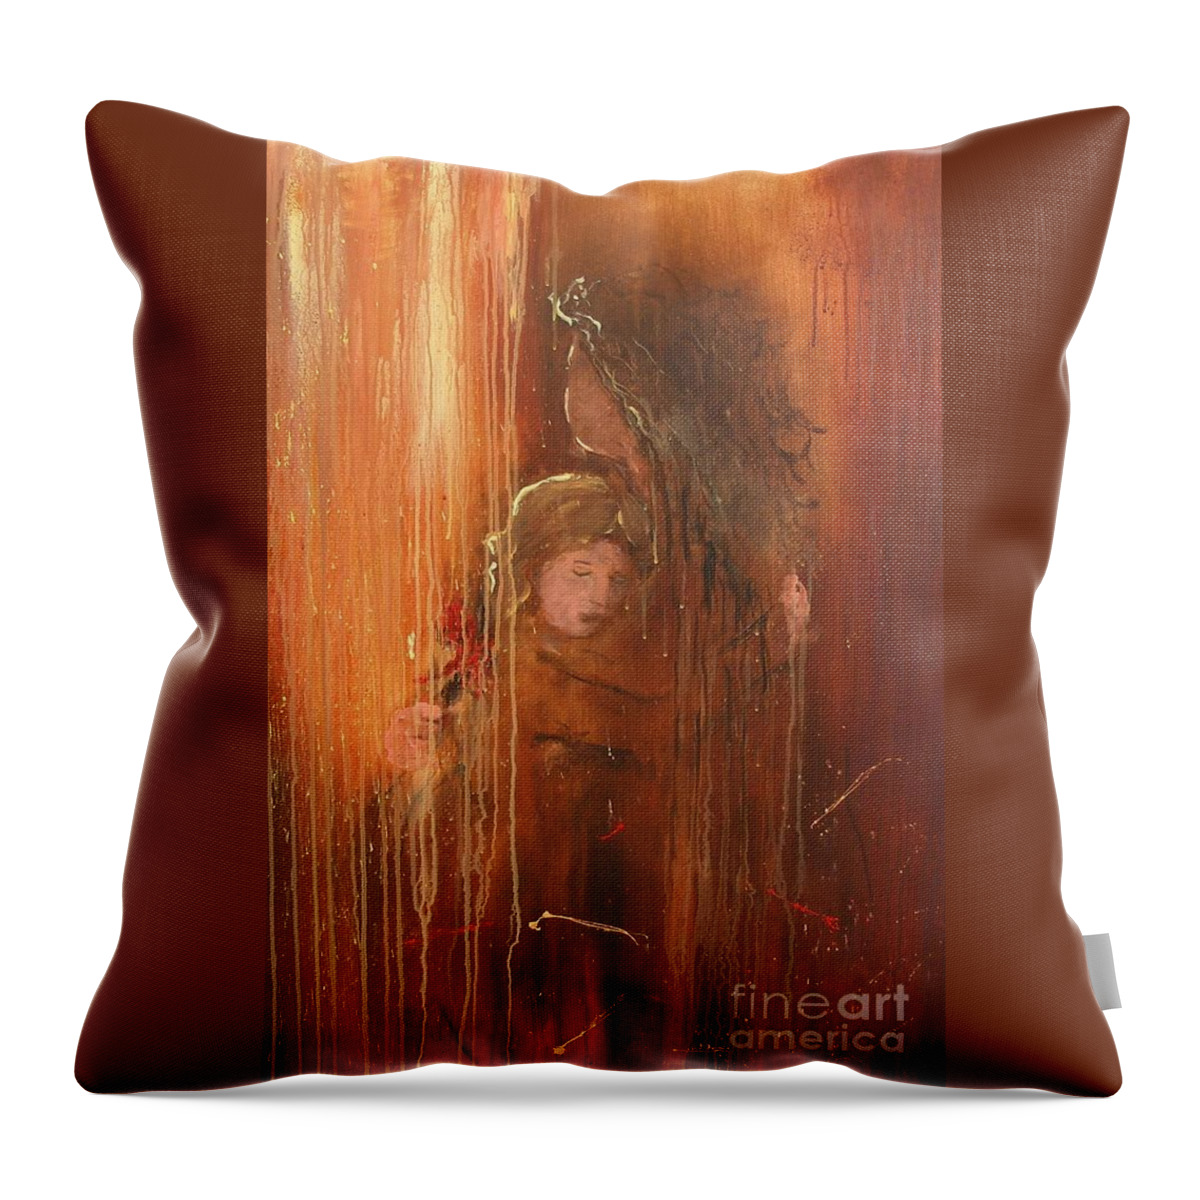 Caring Take Care Mother And Daughter Mom Baby Abstract Painting I Love You Rain Hug Little Girl Lovely Care Throw Pillow featuring the painting Care by Miroslaw Chelchowski